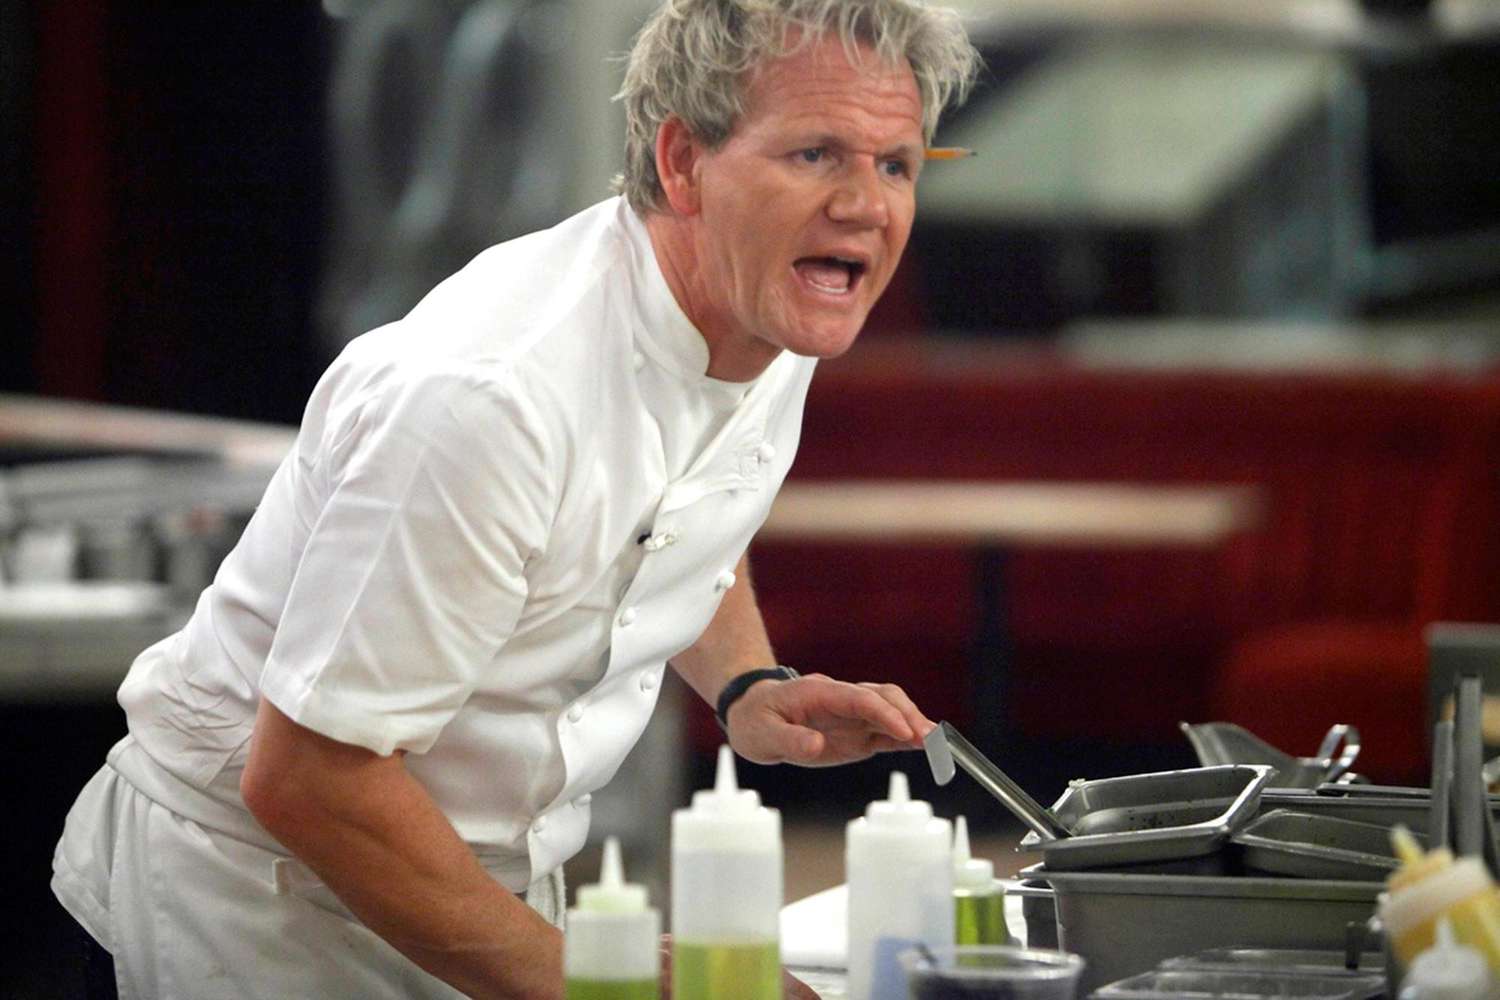 News Without Politics, Celebrity chef Gordon Ramsey to the rescue, best food news unbiased